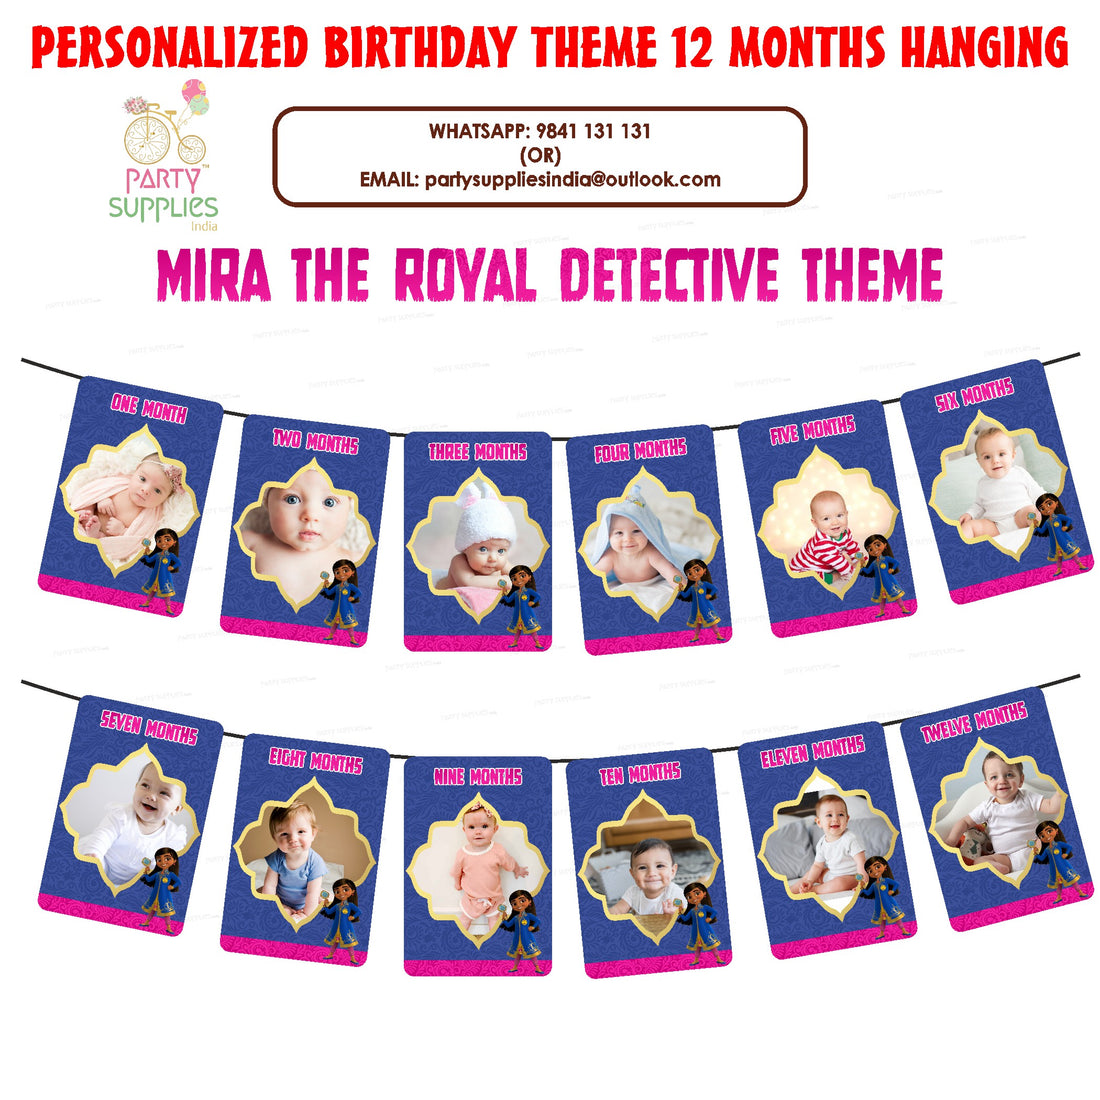 PSI Mira the Royal Detective Theme 12 Months Photo Banner